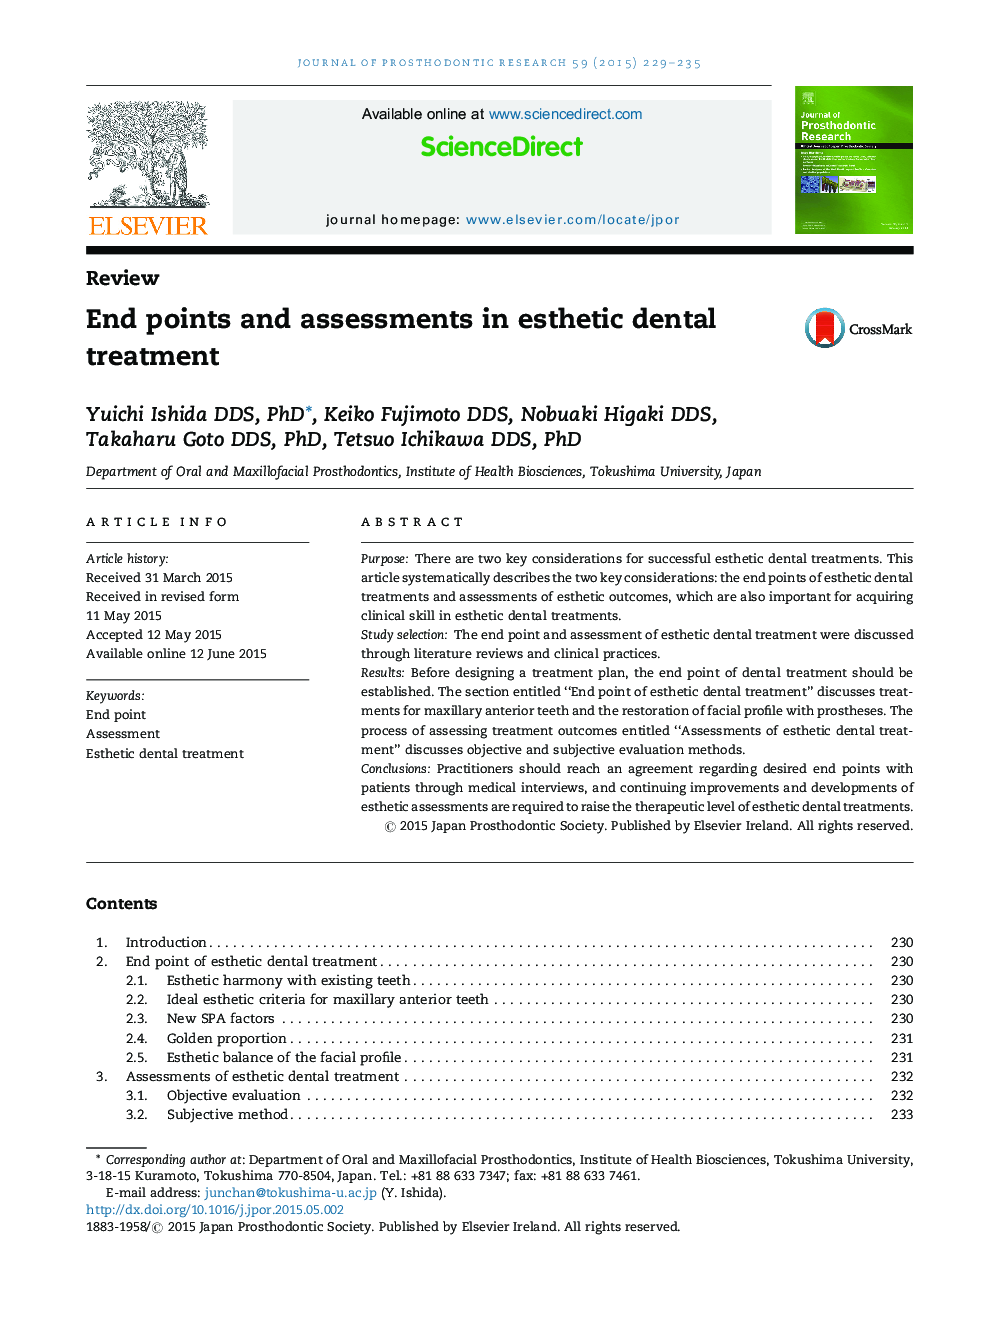 End points and assessments in esthetic dental treatment